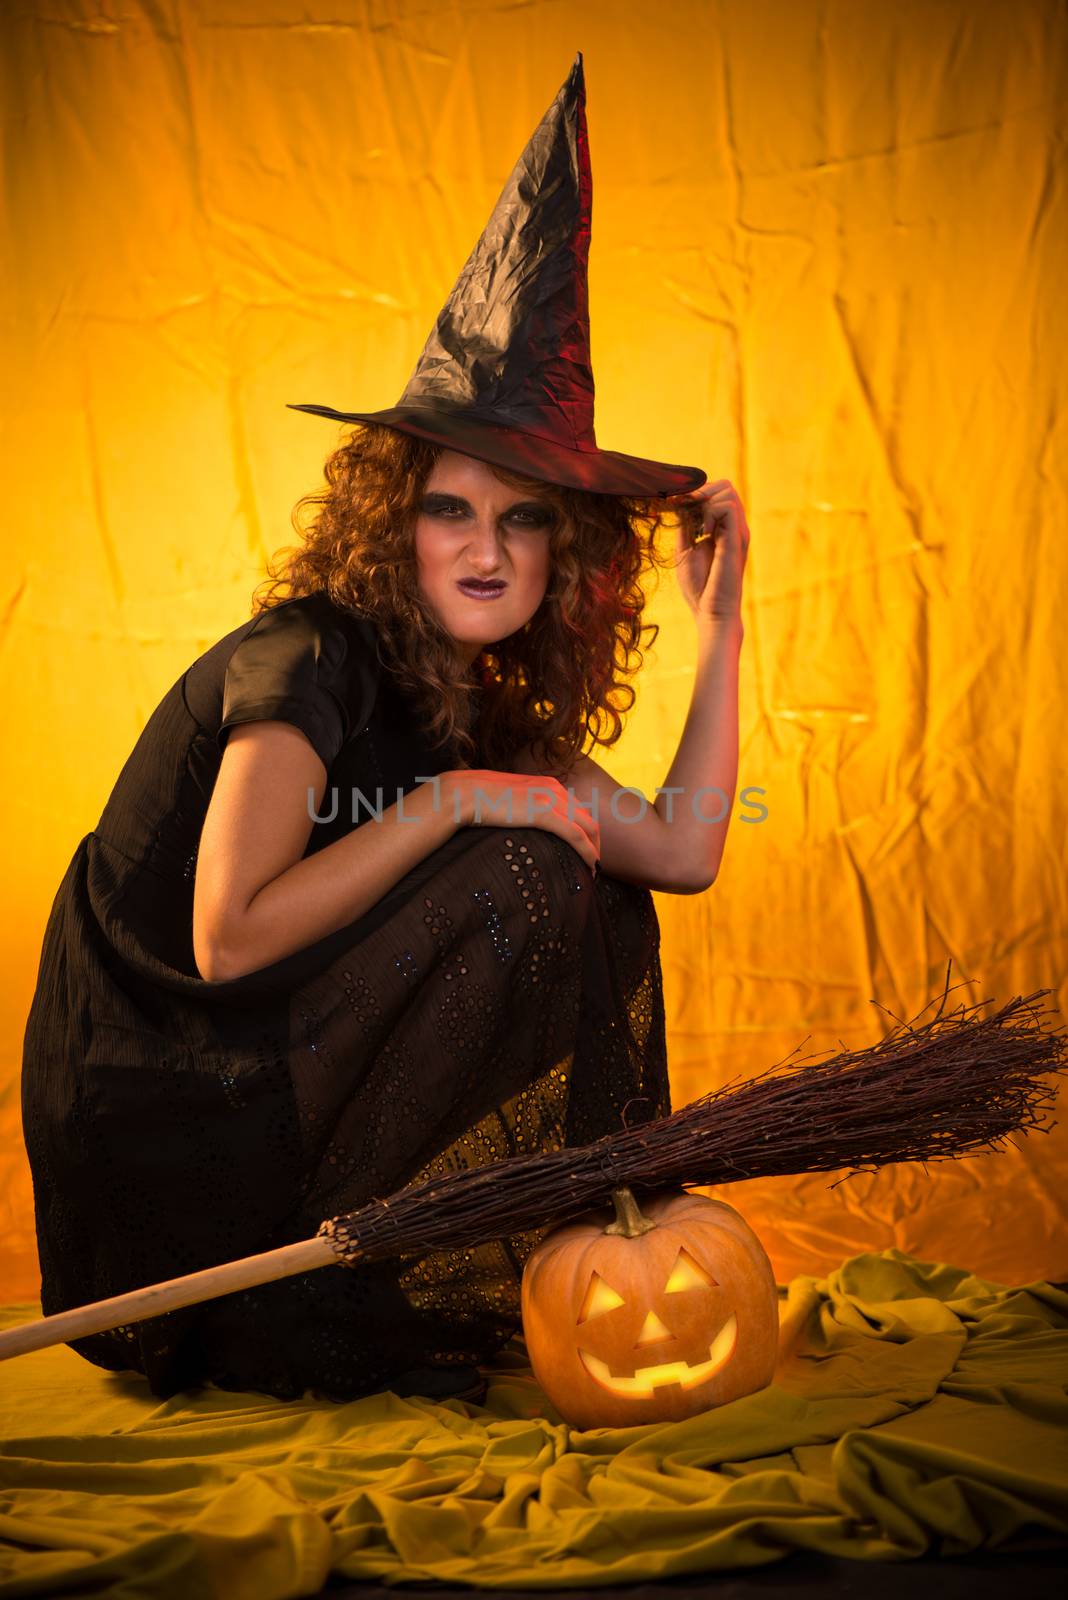 Young woman dressed like a witch. She is in dark clothing with broom and pumpkin.